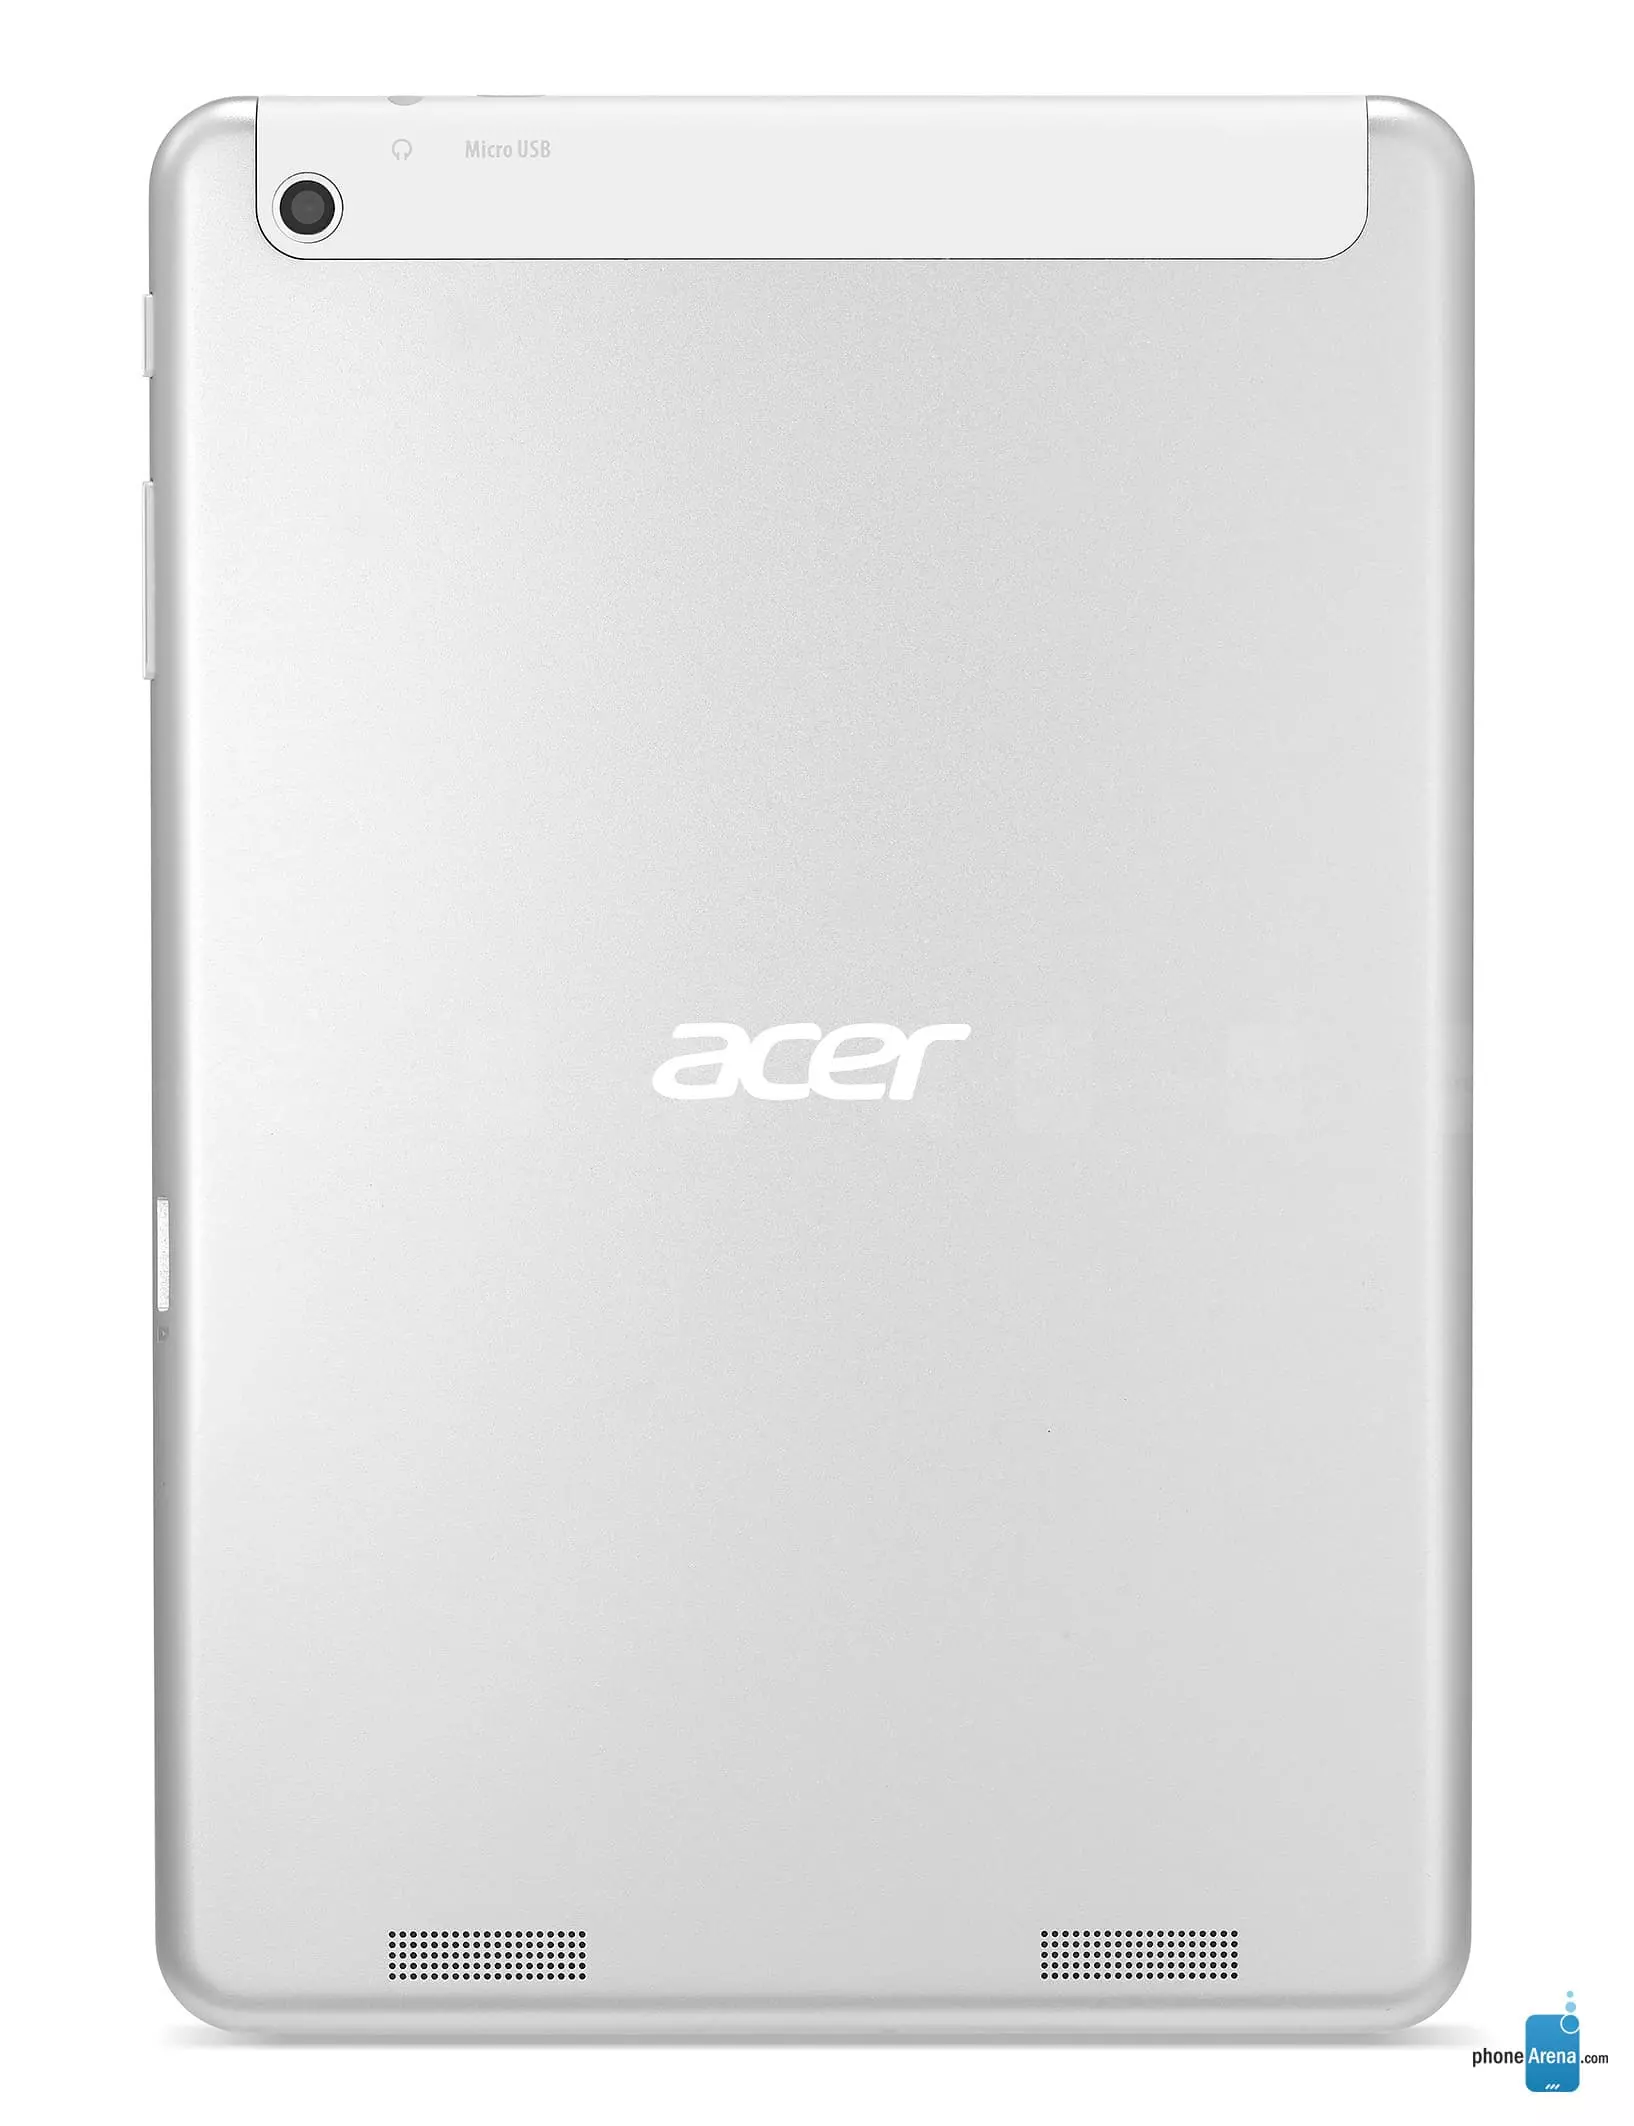 Acer Iconia A1-830 характеристики